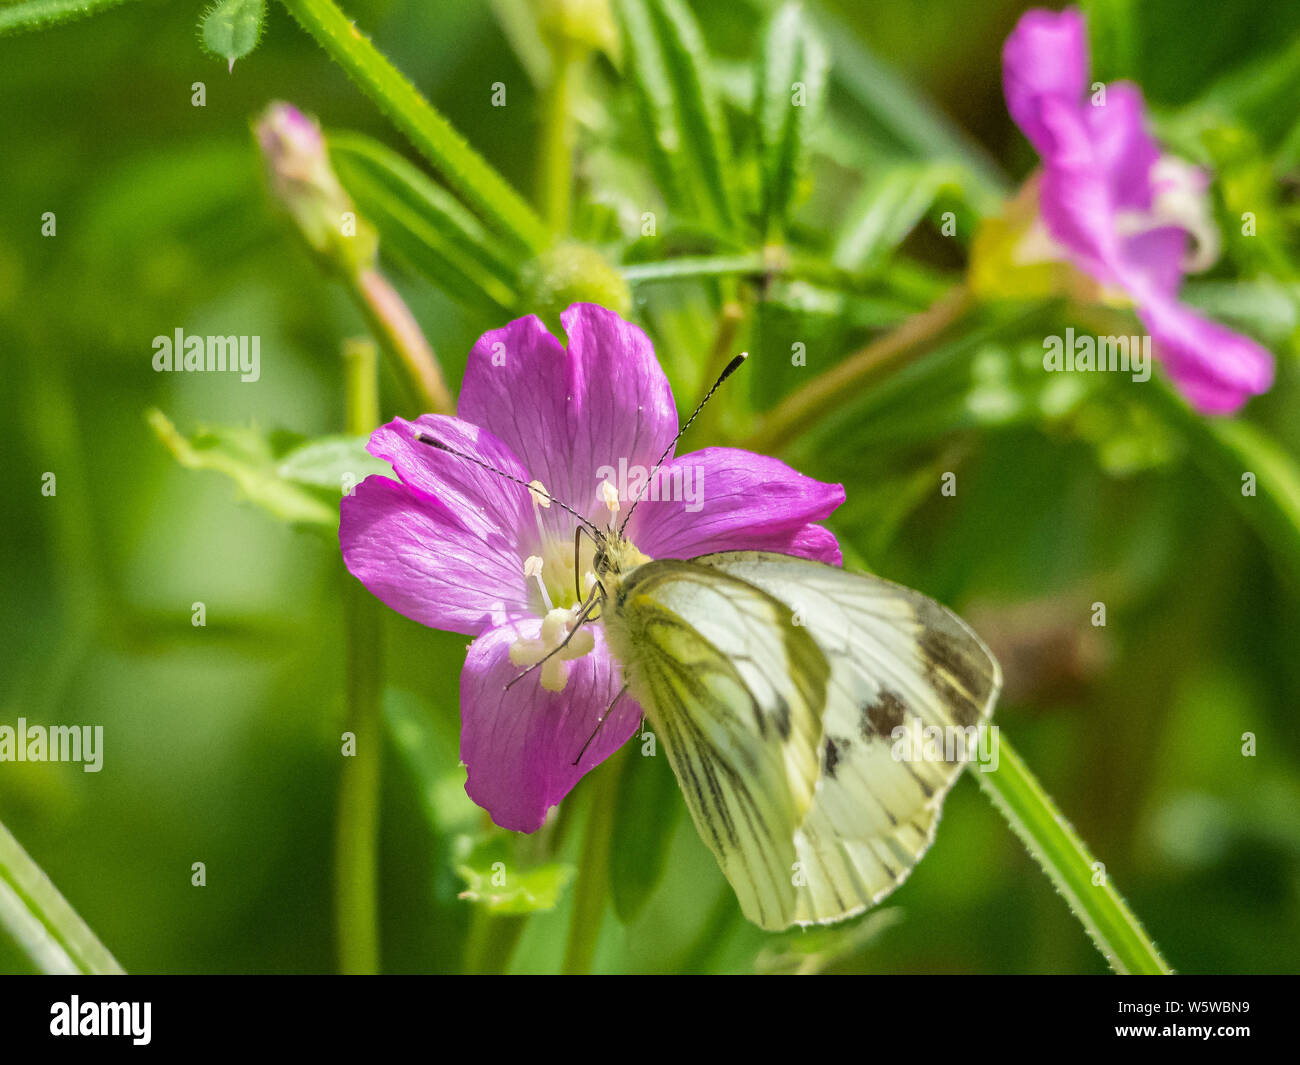 Cabbage White Butterfly feeding on the nectar of a Wild Flower Stock Photo